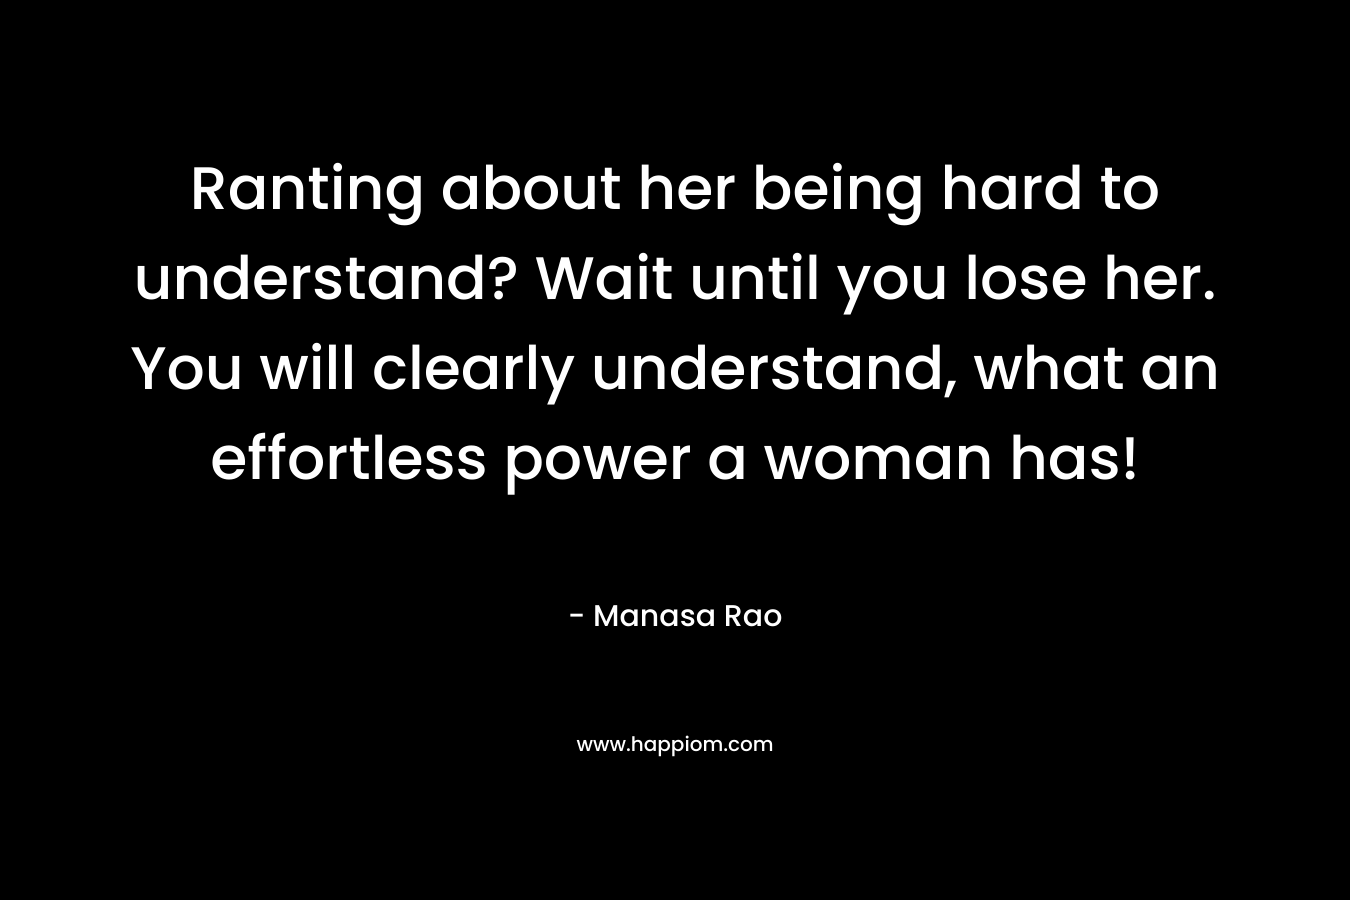 Ranting about her being hard to understand? Wait until you lose her. You will clearly understand, what an effortless power a woman has!